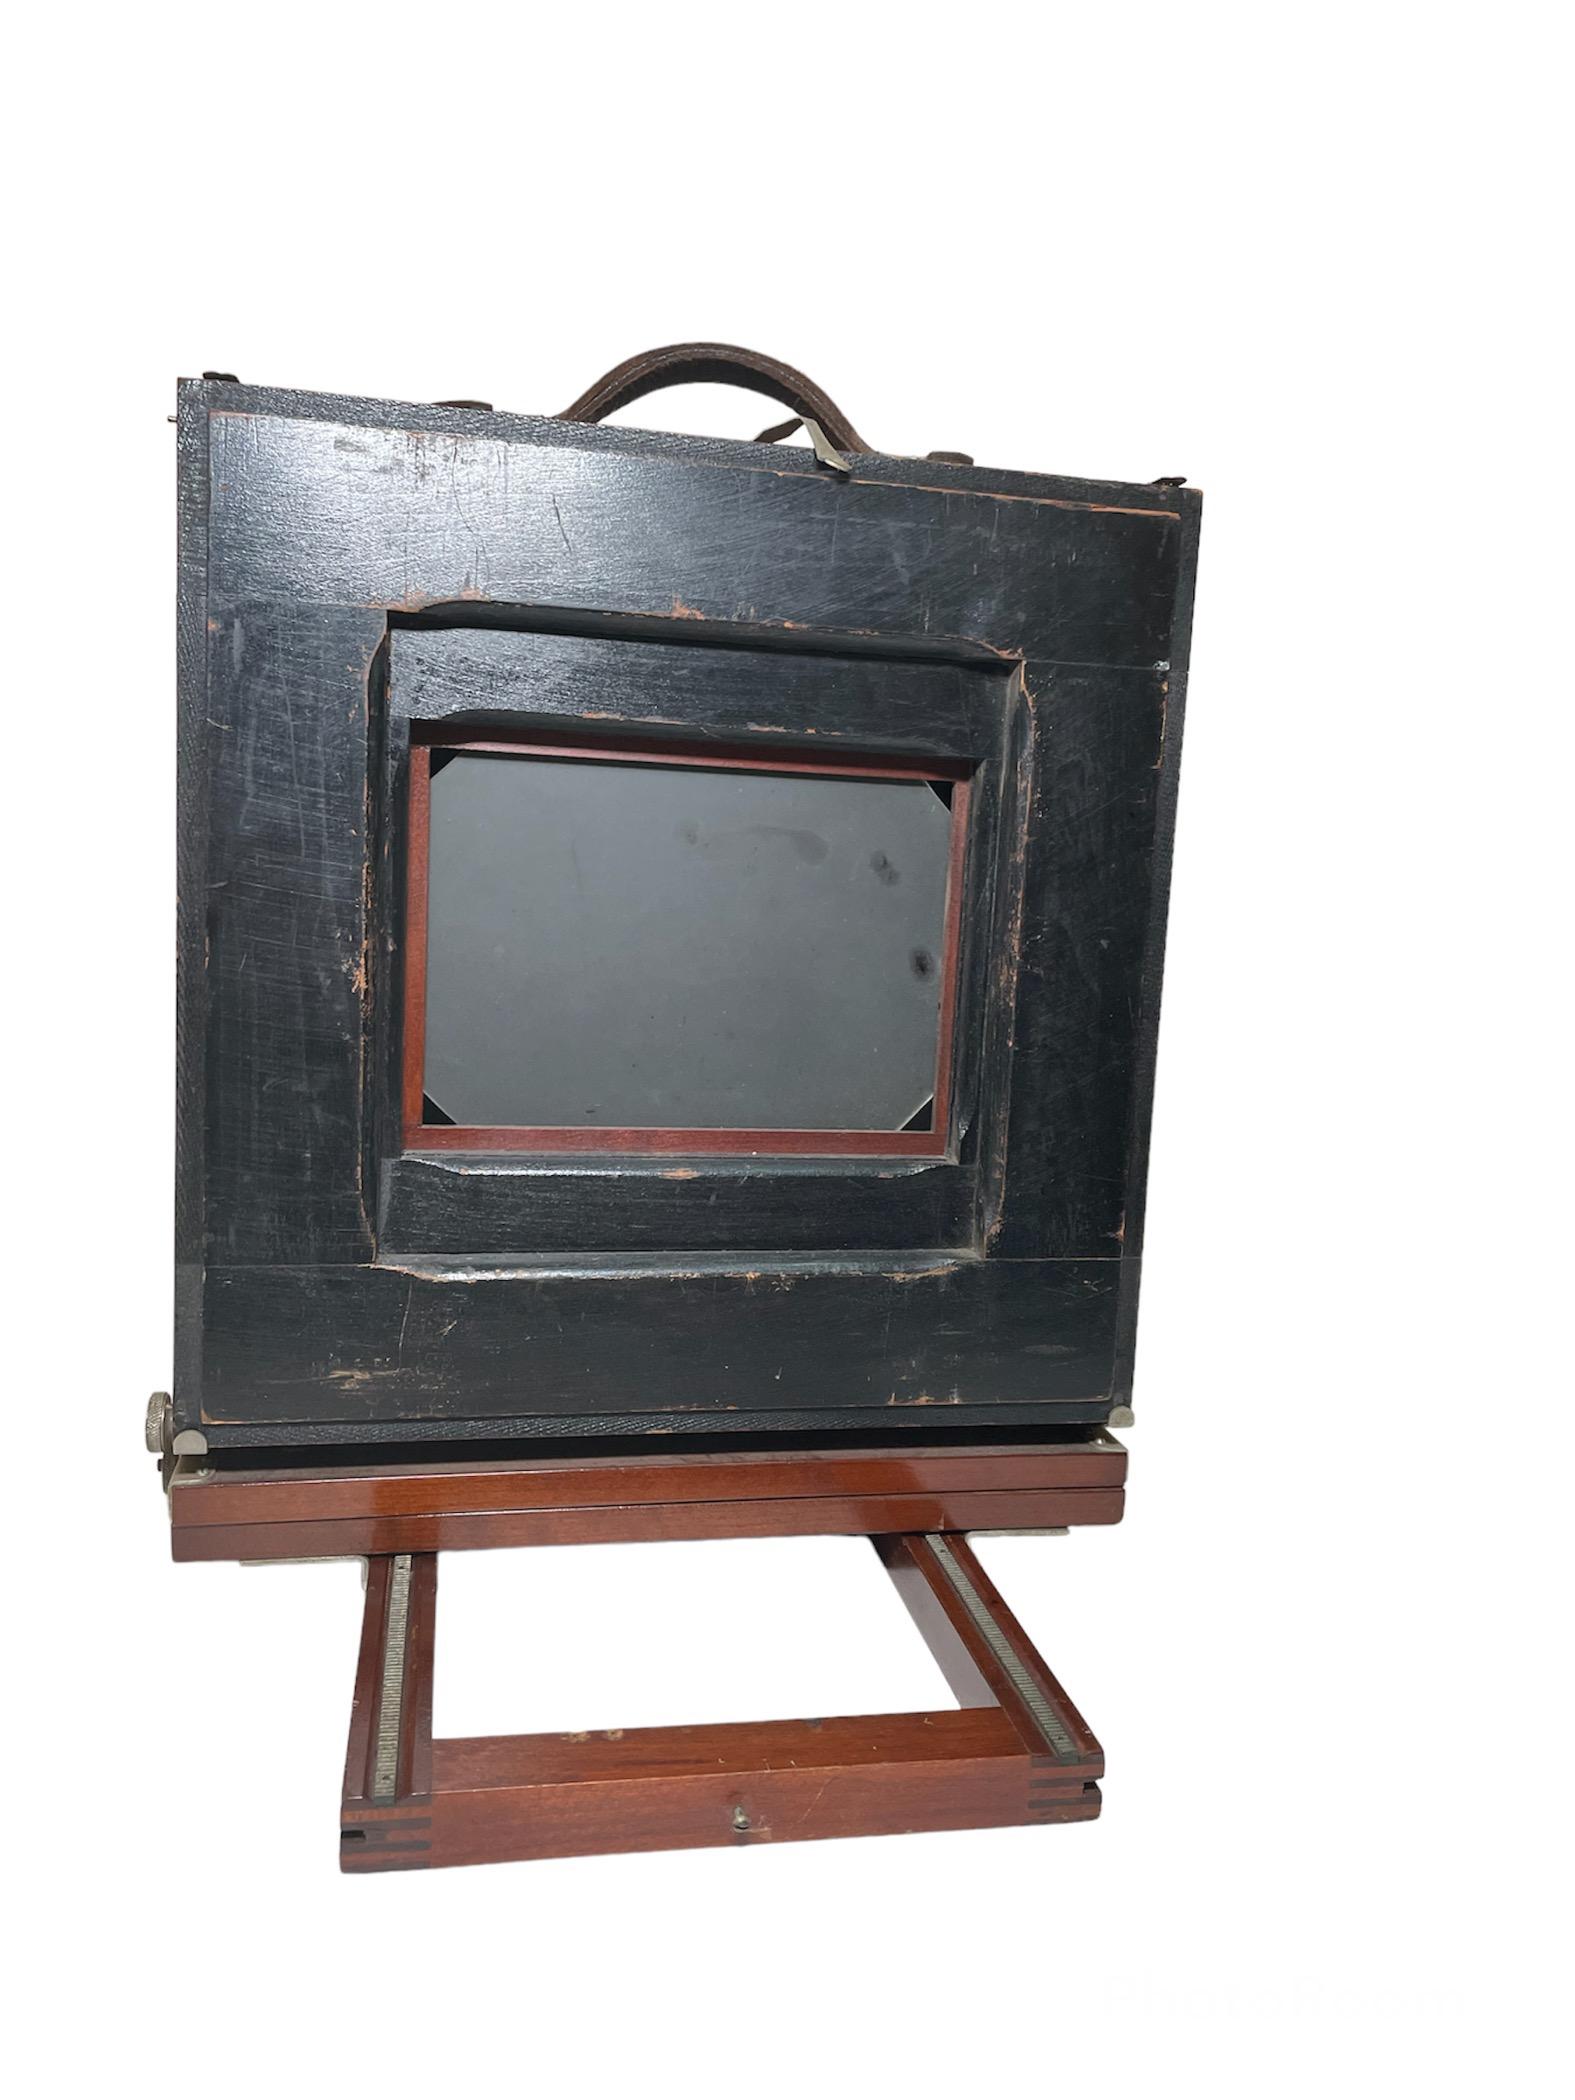 Early 20th Century Korona Home Portrait Camera For Sale 2